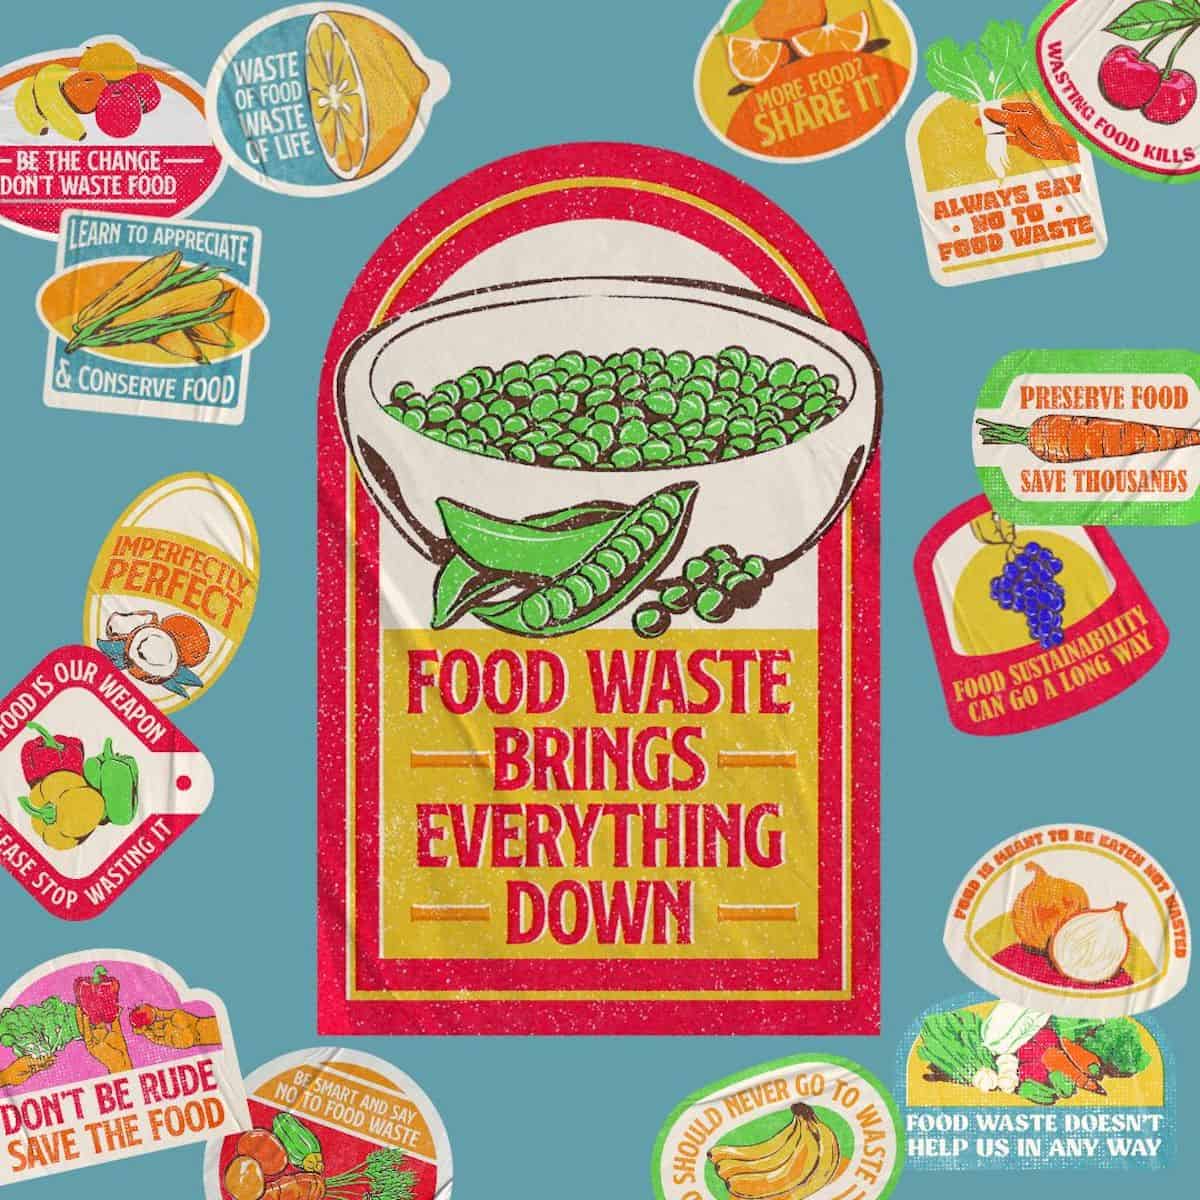 turquoise square with cartoon stickers that read "food waste brings everything down, food is meant to be eaten not wasted, be the change don't waste food."